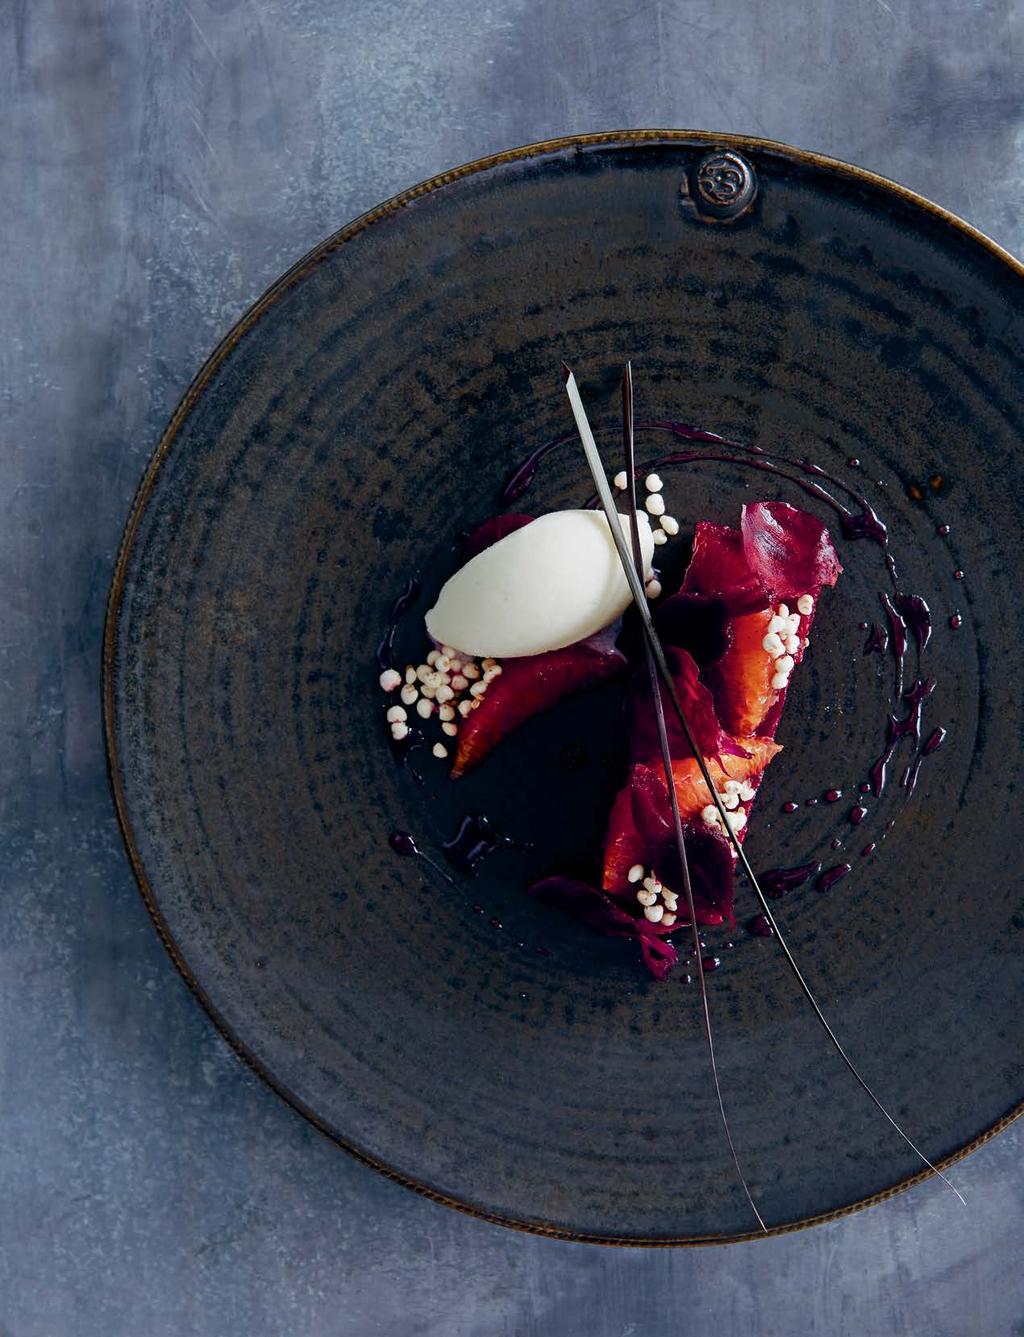 This lively dessert is a great alternative to rice pudding and is jam-packed with nutrients. The flavours of the beetroot, cardamom, orange and goat milk yoghurt marry beautifully.